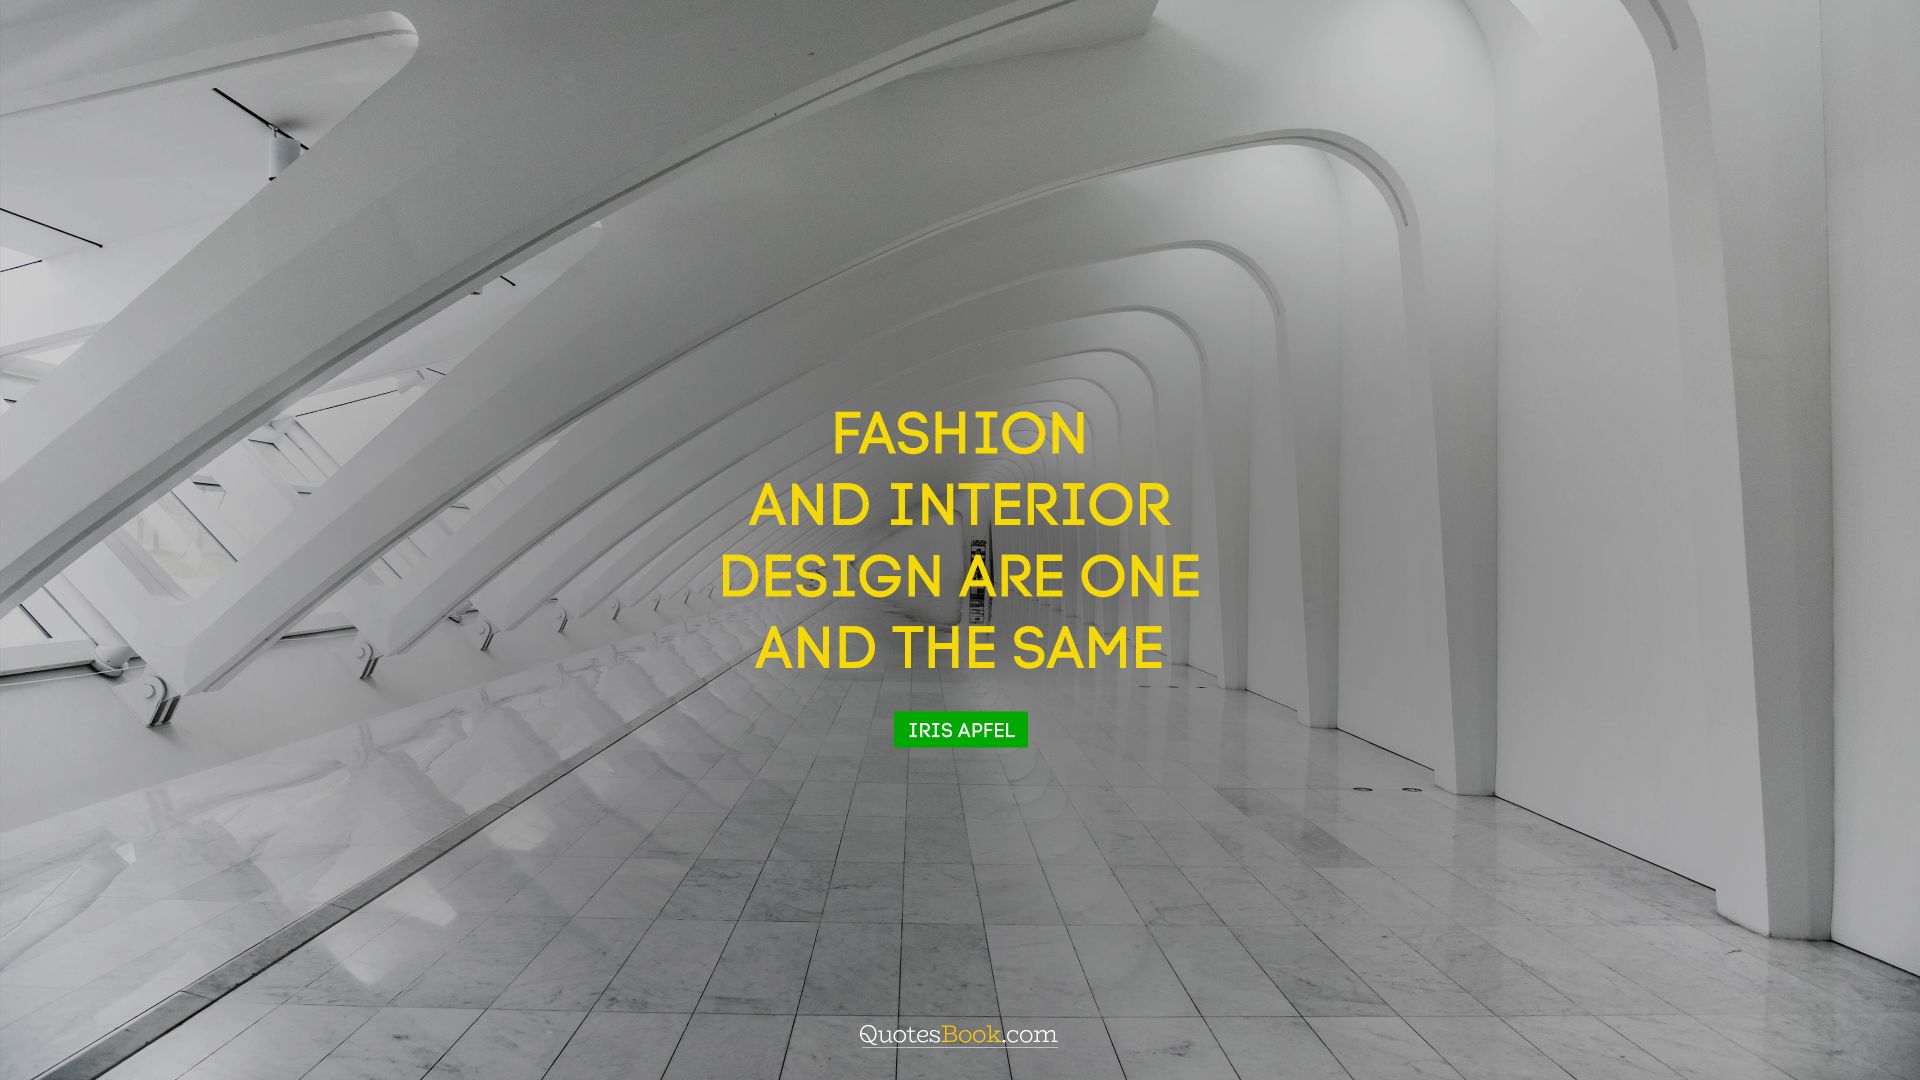 Fashion and interior design are one and the same. - Quote by Iris Apfel